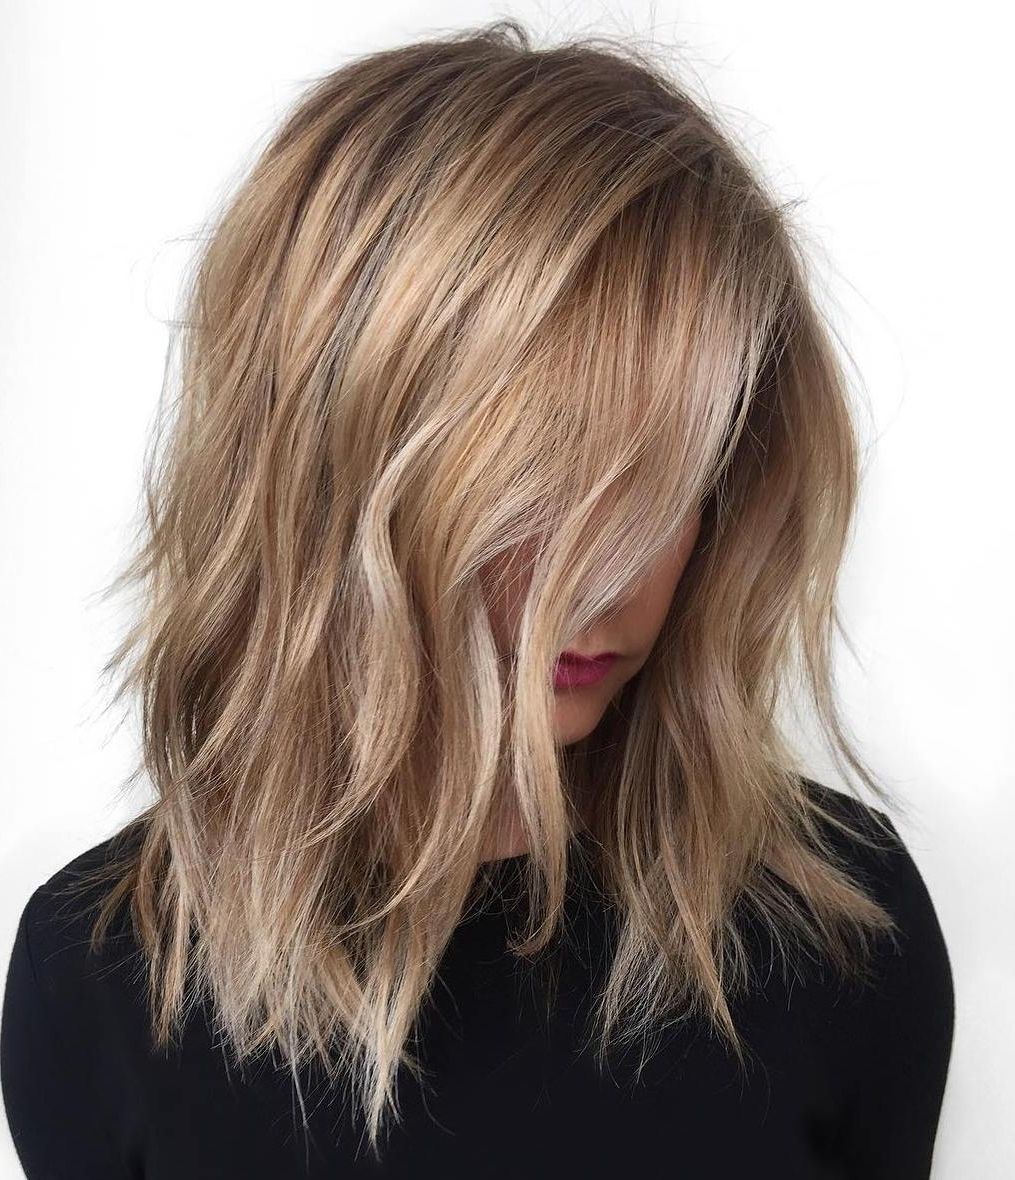 40 Styles With Medium Blonde Hair For Major Inspiration With Recent Blunt Cut White Gold Lob Blonde Hairstyles (View 19 of 20)